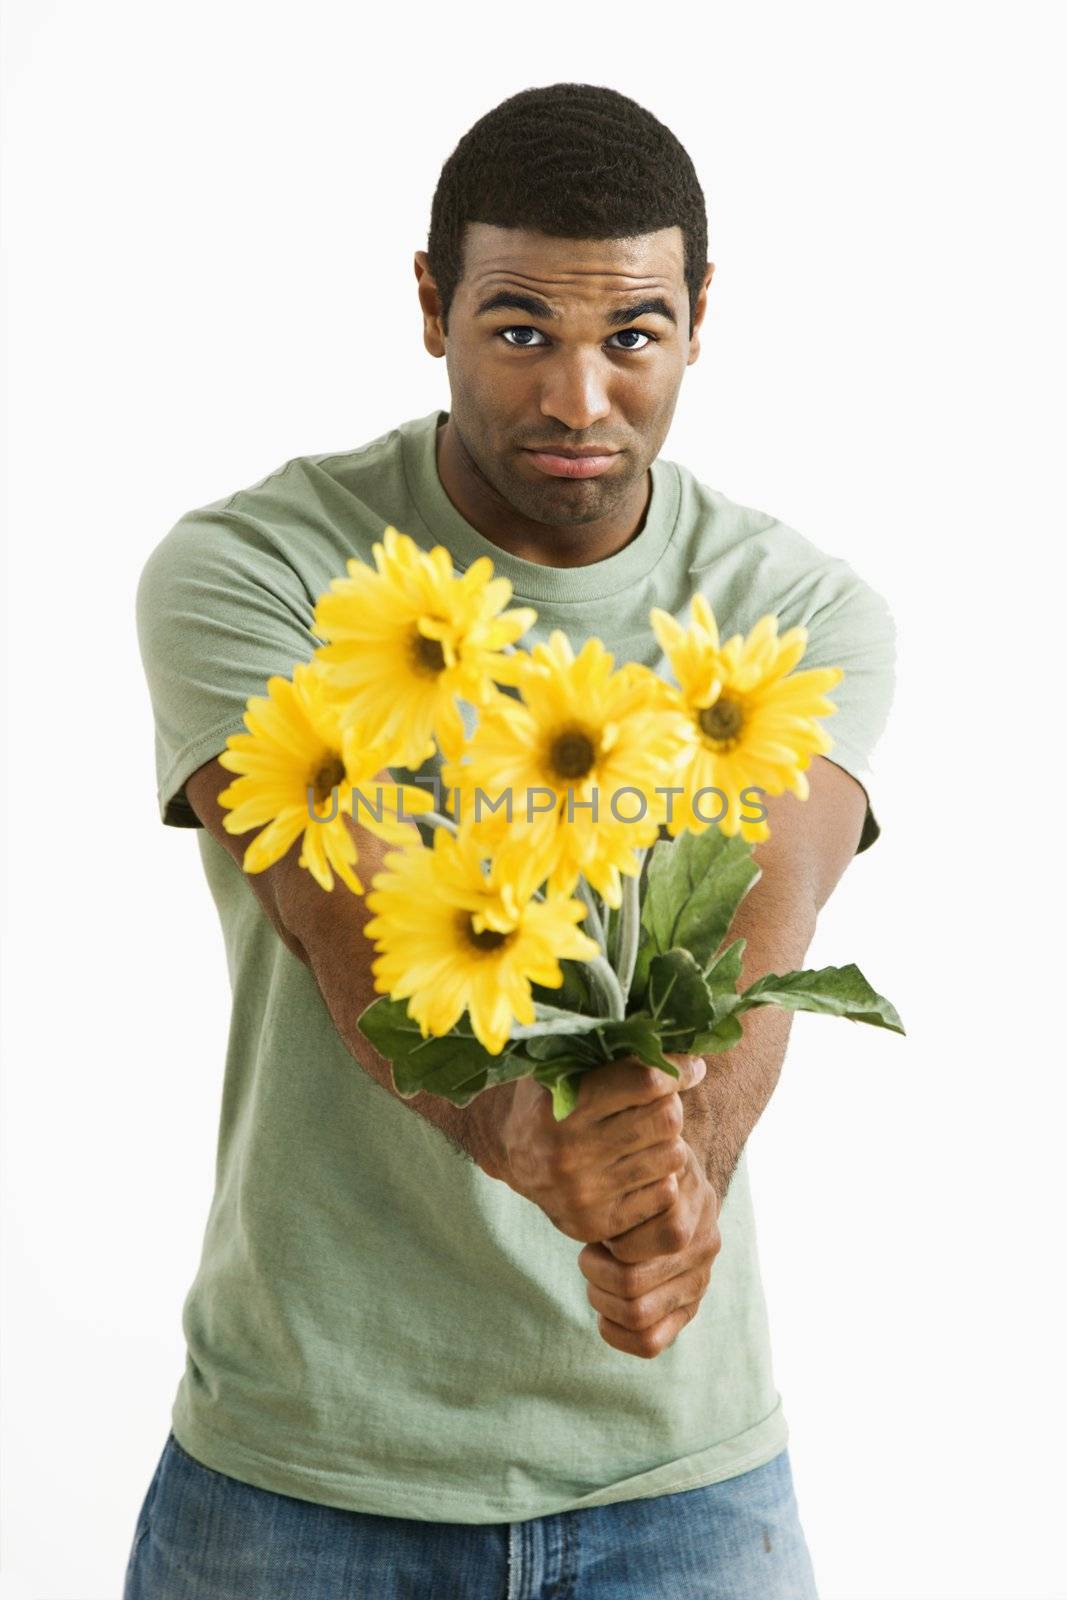 Pouting African American male holding out bouquet of yellow flowers to unseen person.